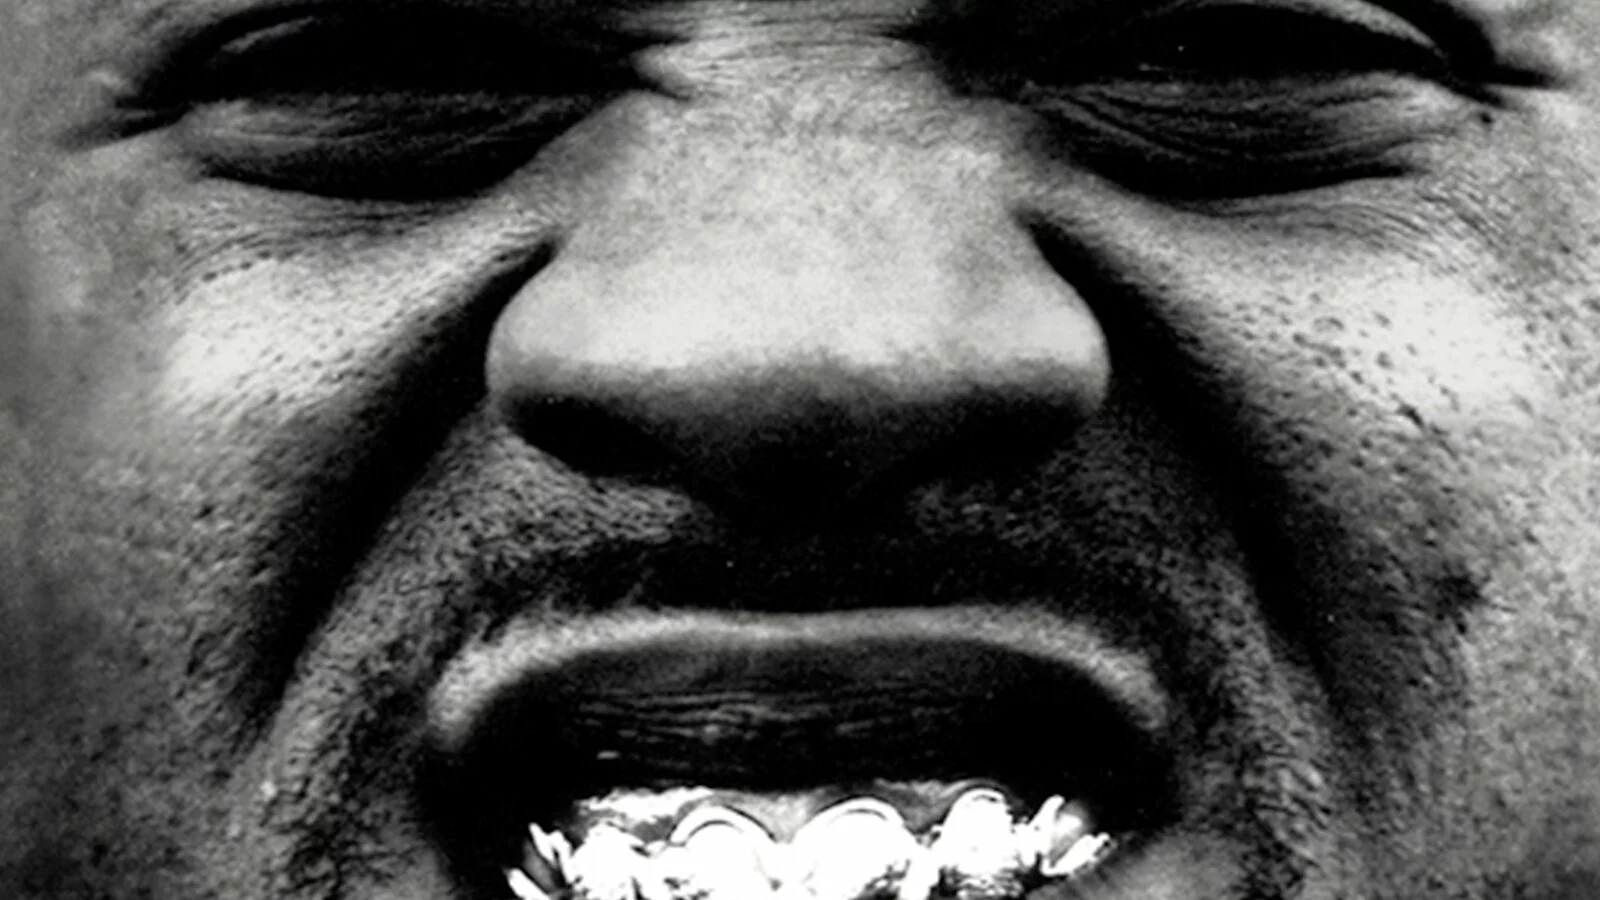 Still black and white shot of a black person scrunching up their nose to display a grill on their teeth.